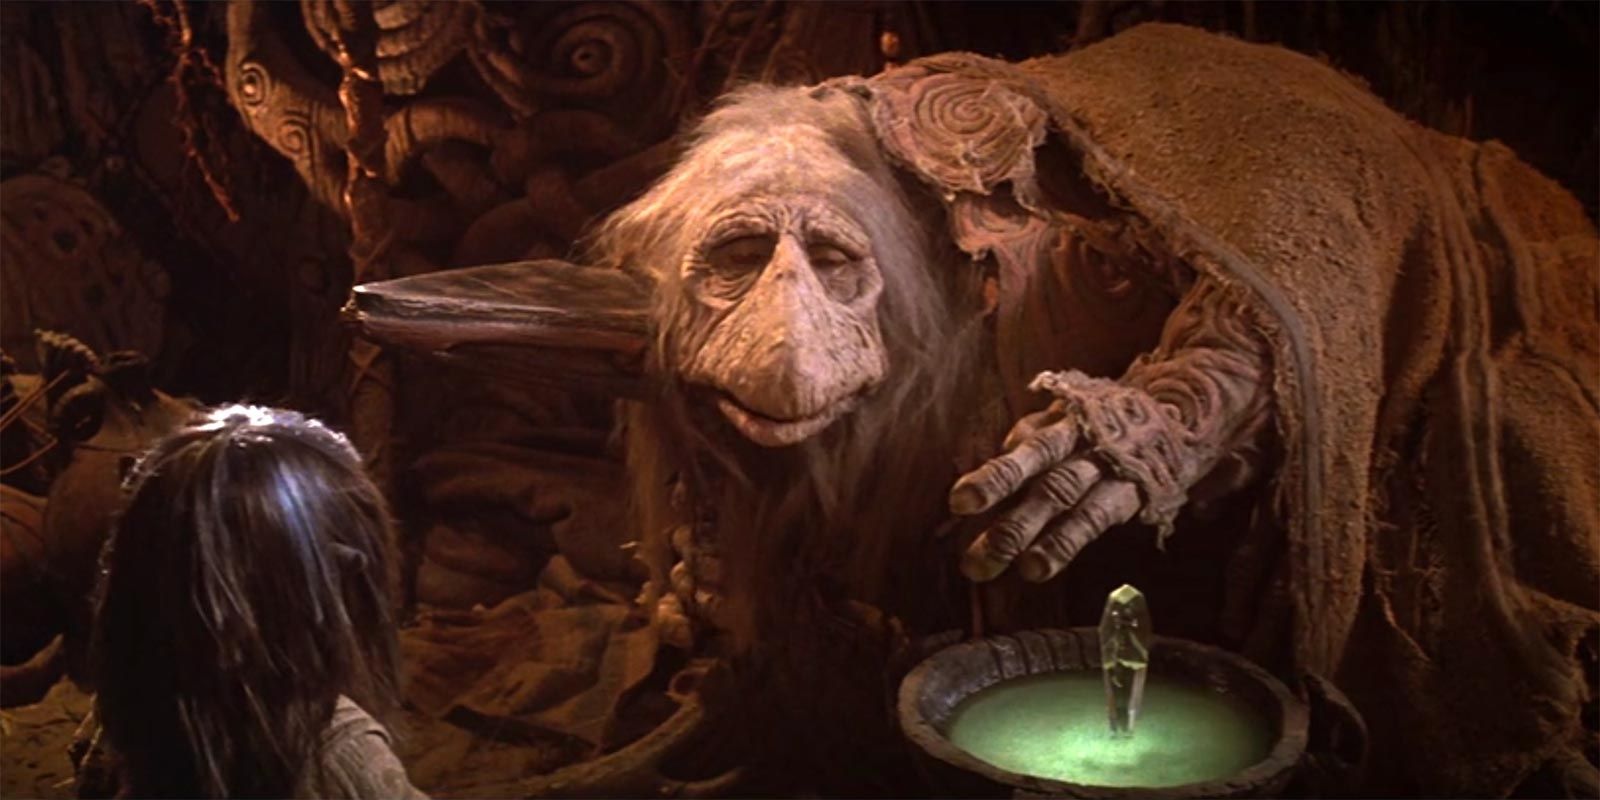 A Mystic from The Dark Crystal wearing a brown robe.